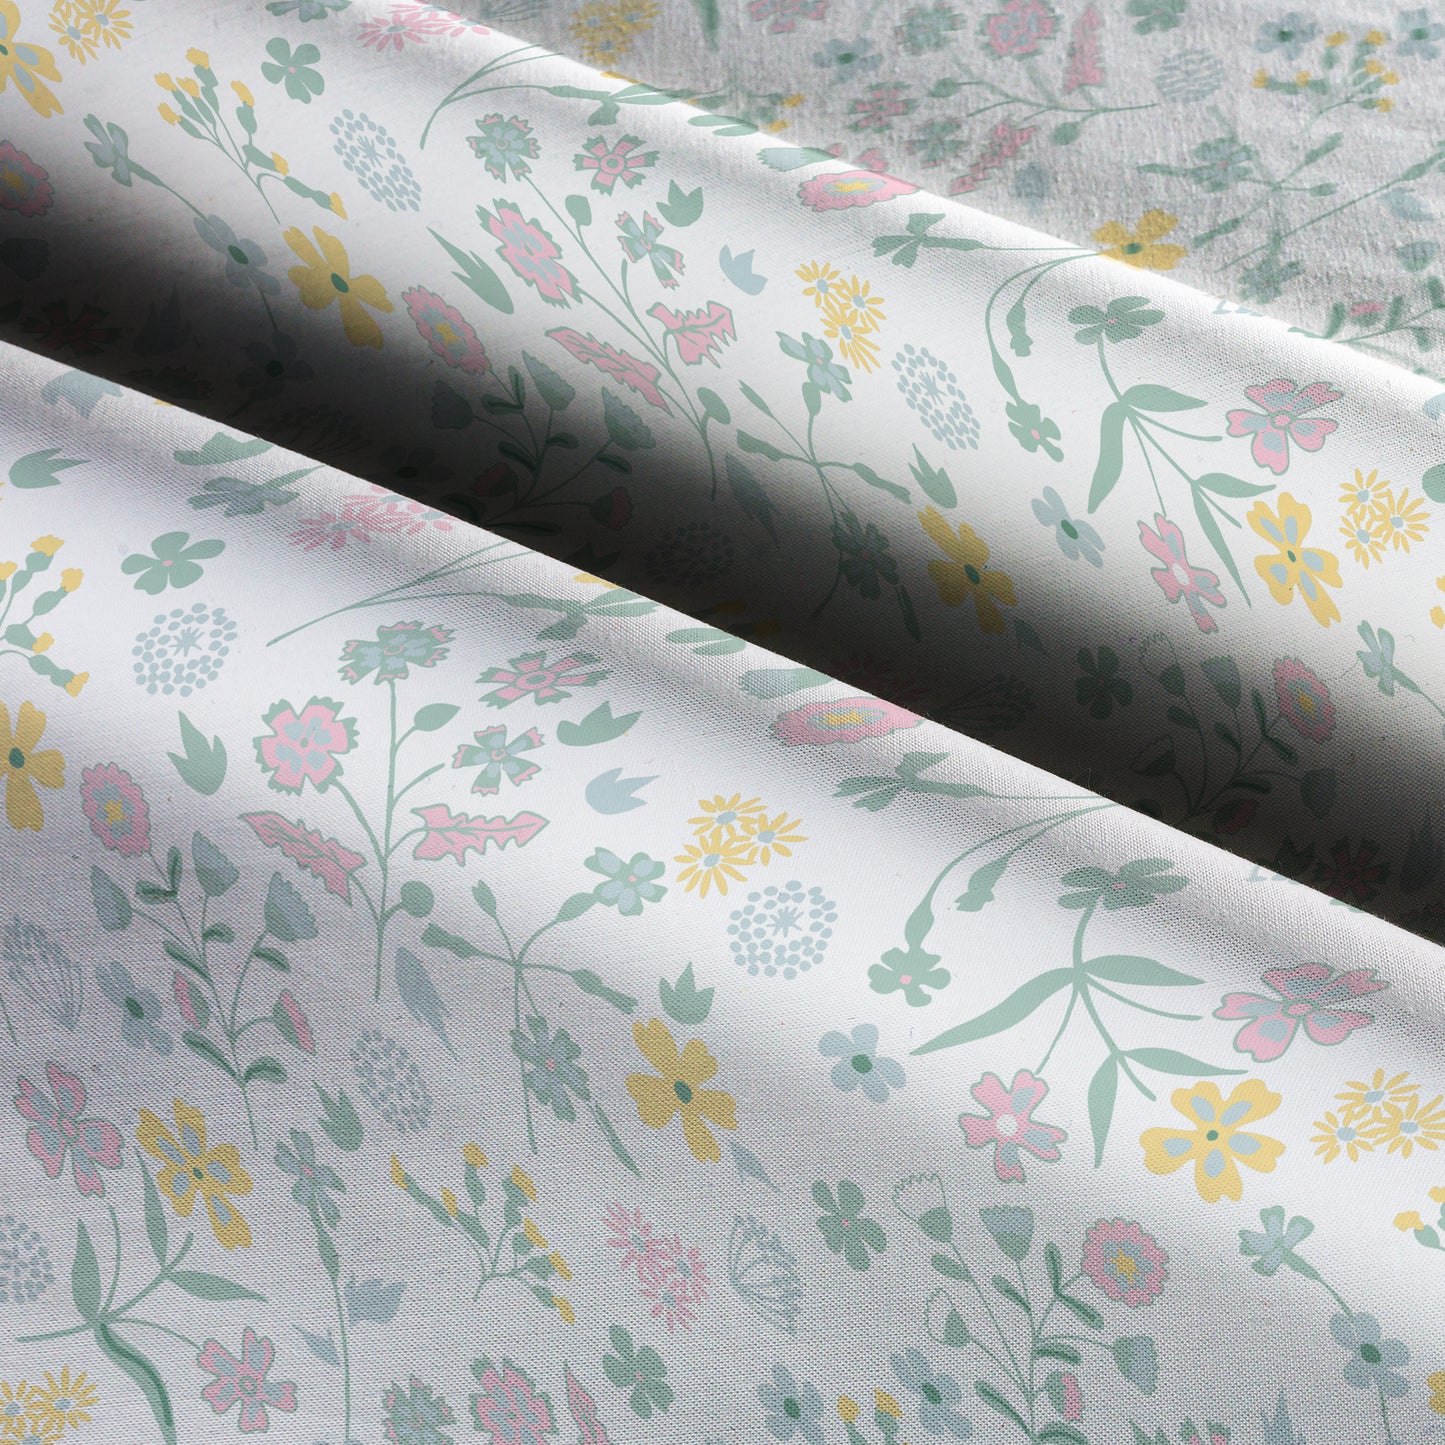 Itty Bitty Jack - Soft Floral Cotton Fabric